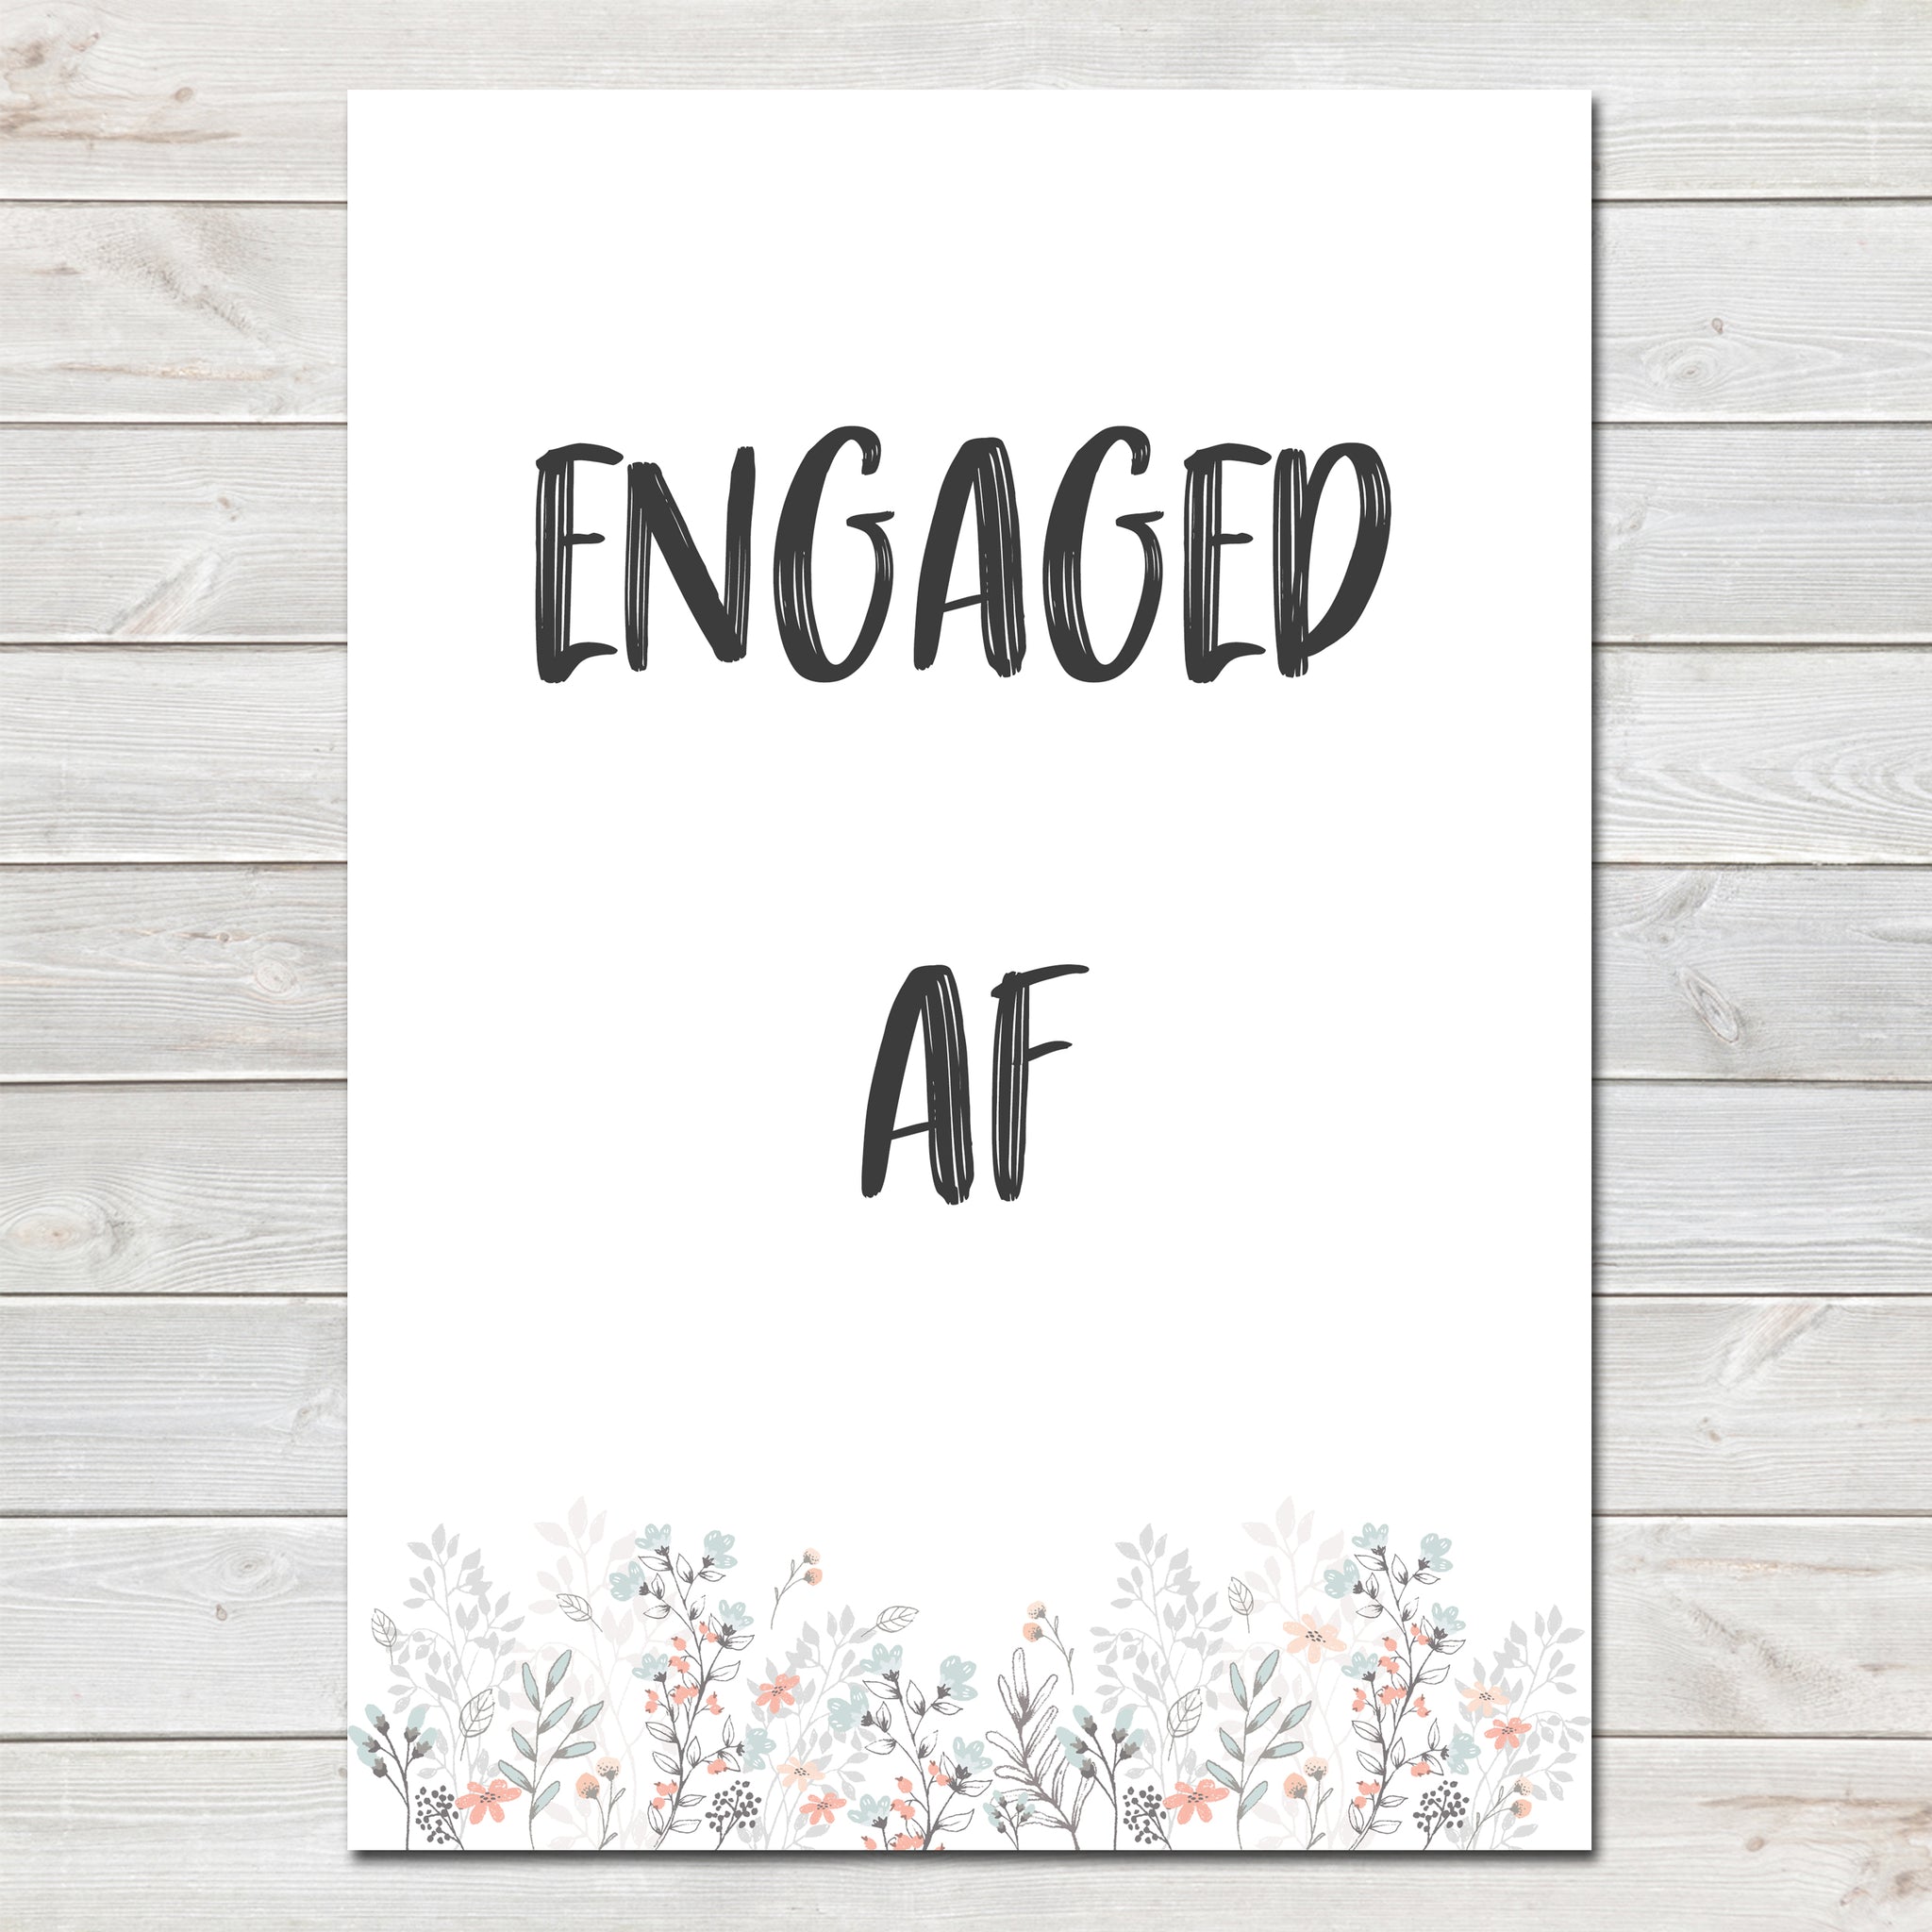 Engagement Party Engaged AF (As F***) Flowery Pastel Poster / Photo Prop / Sign